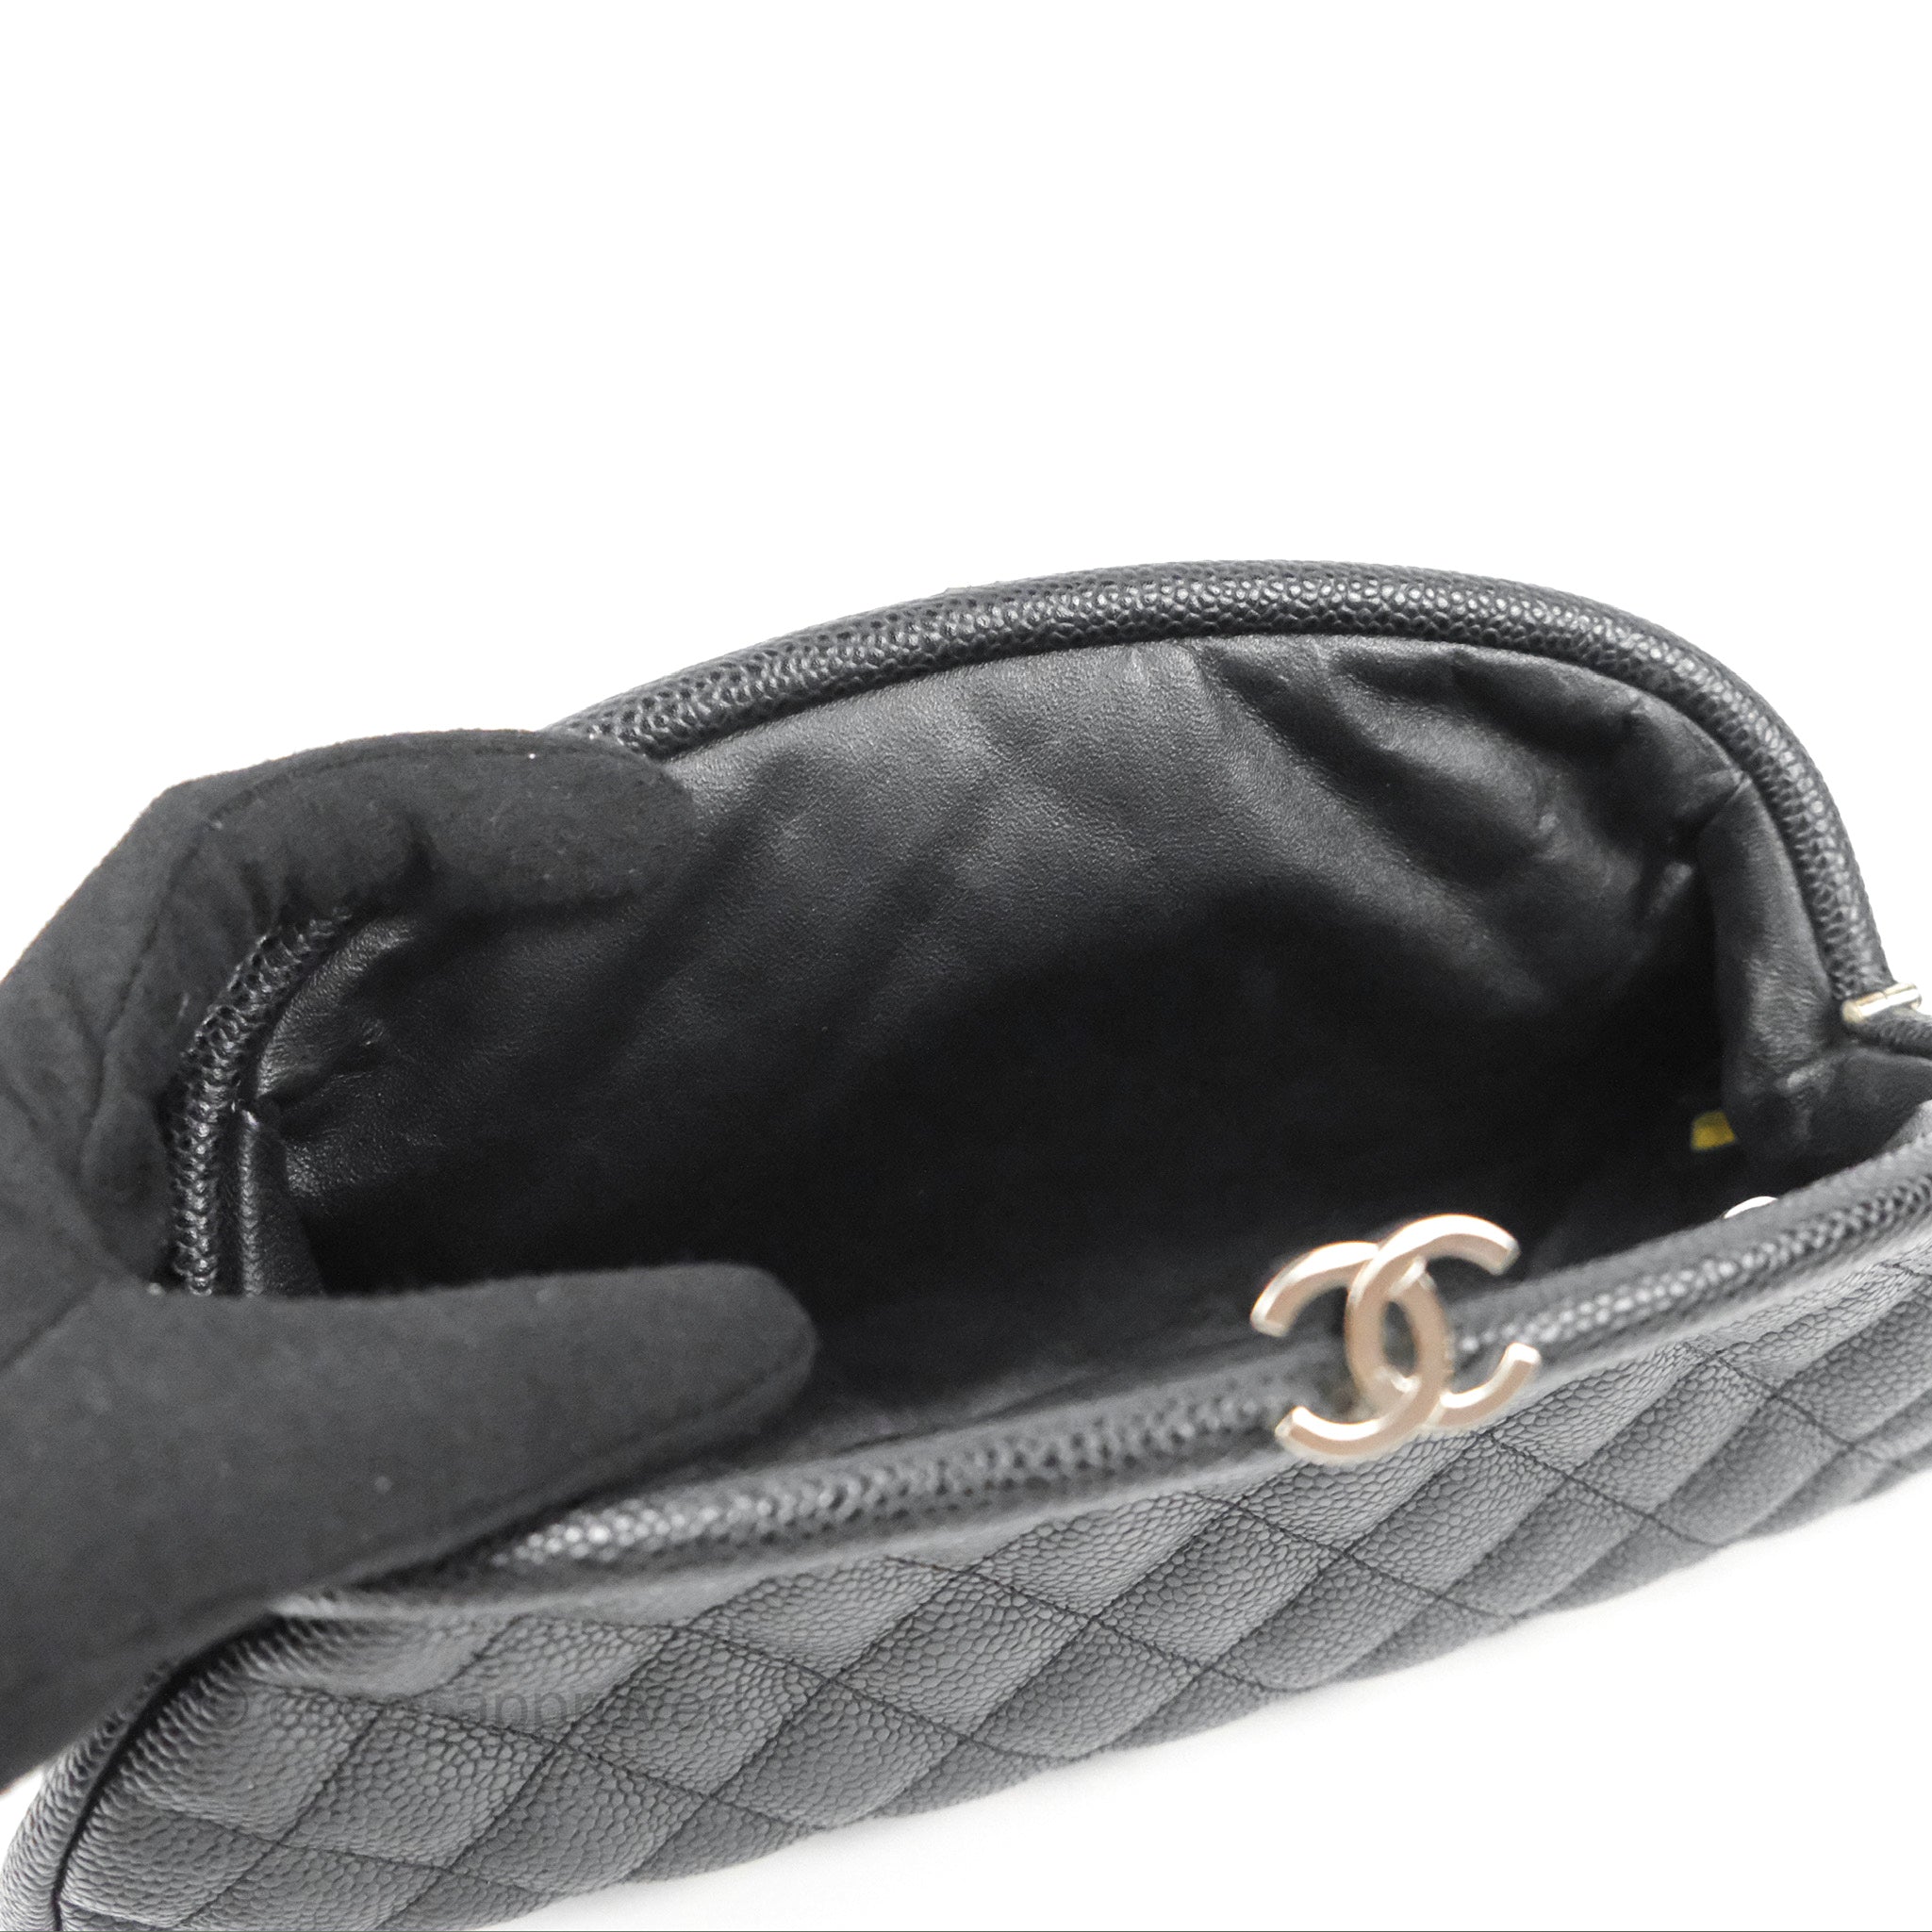 CHANEL DOUBLE KISSLOCK FOLD OVER QUILTED LEATHER MEDIUM CLUTCH